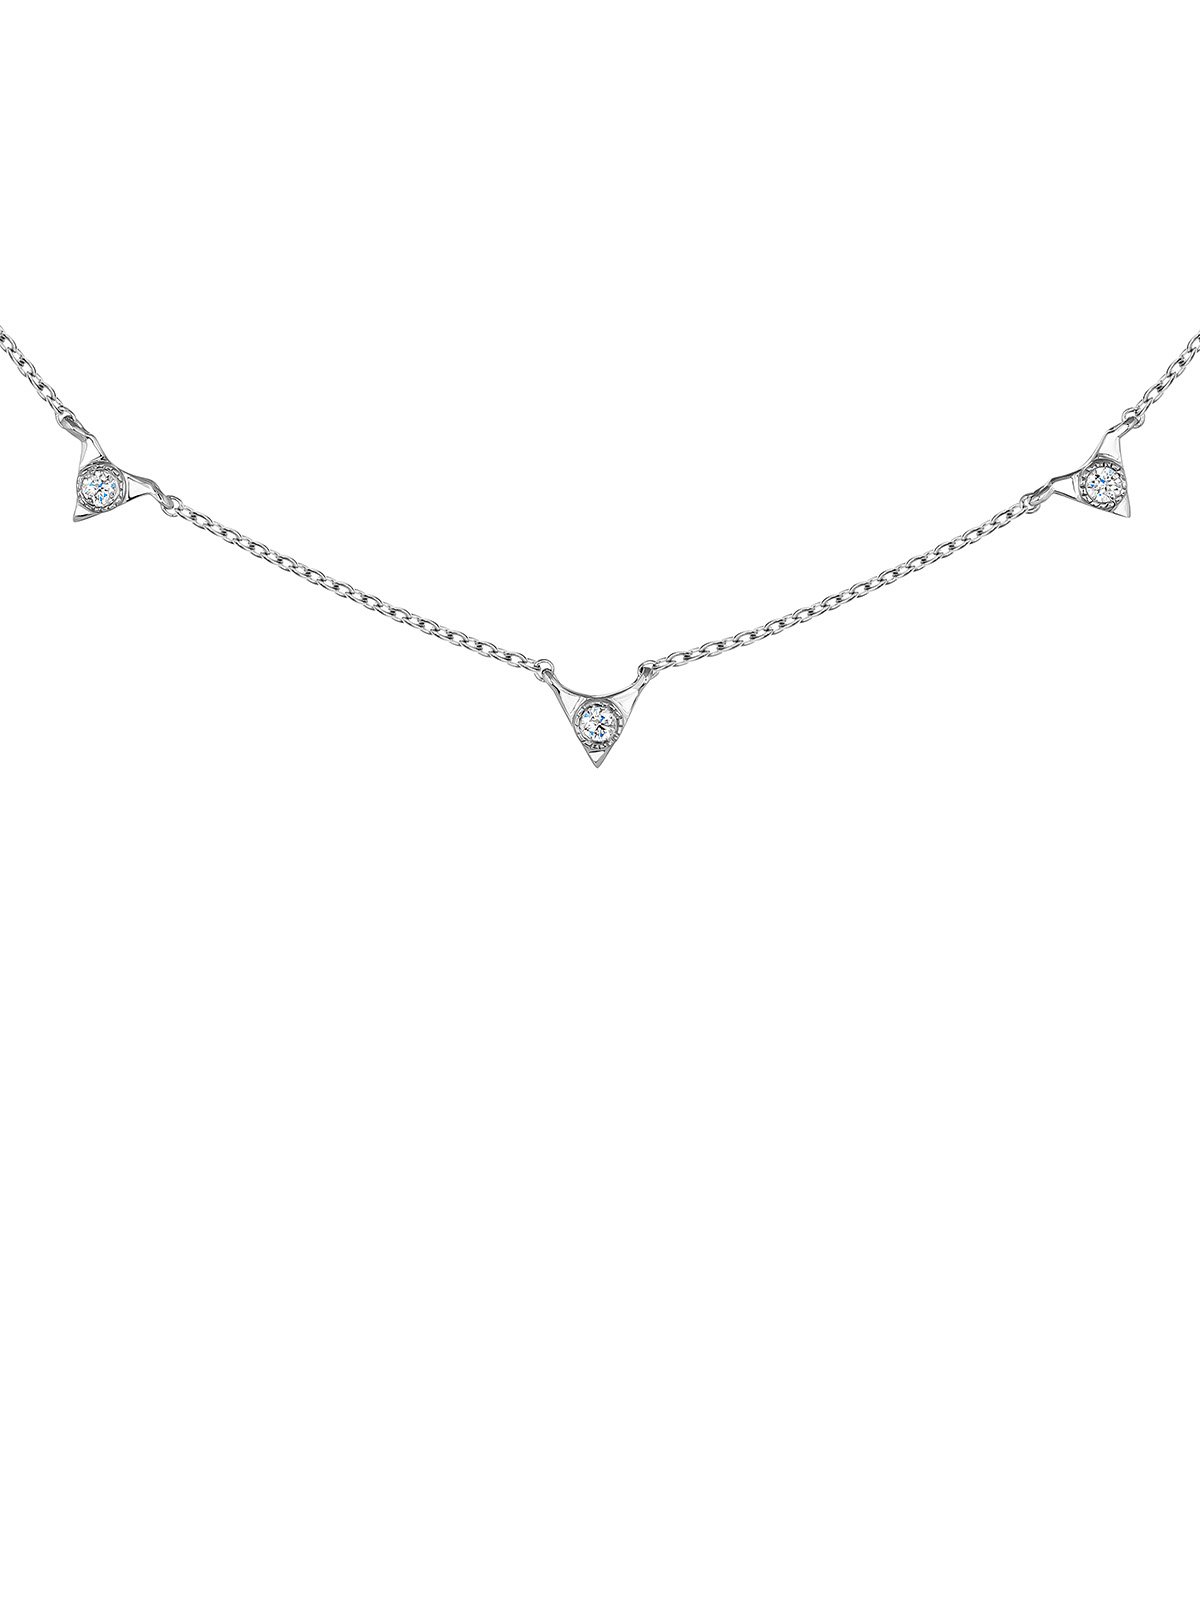 9K White Gold Necklace with Diamonds